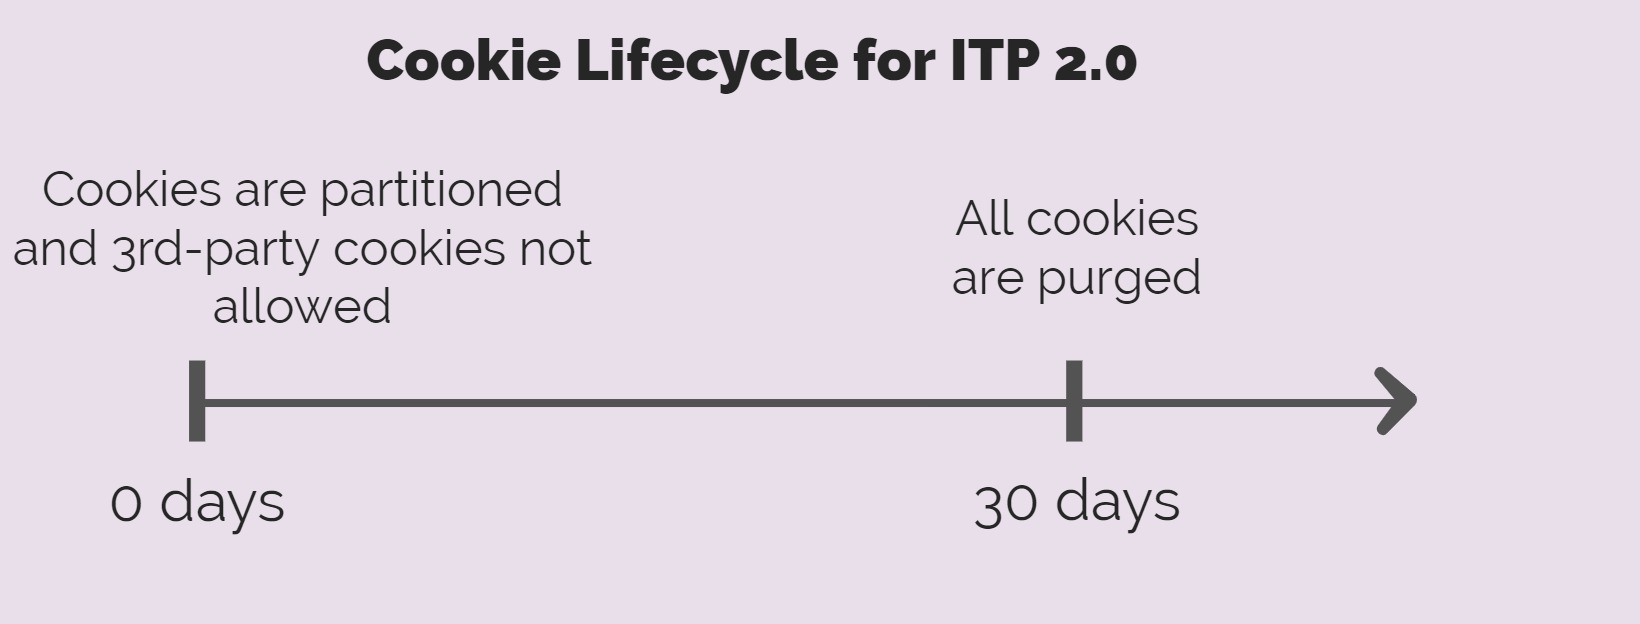 Apple ITP 2.0 Cookie Lifecycle